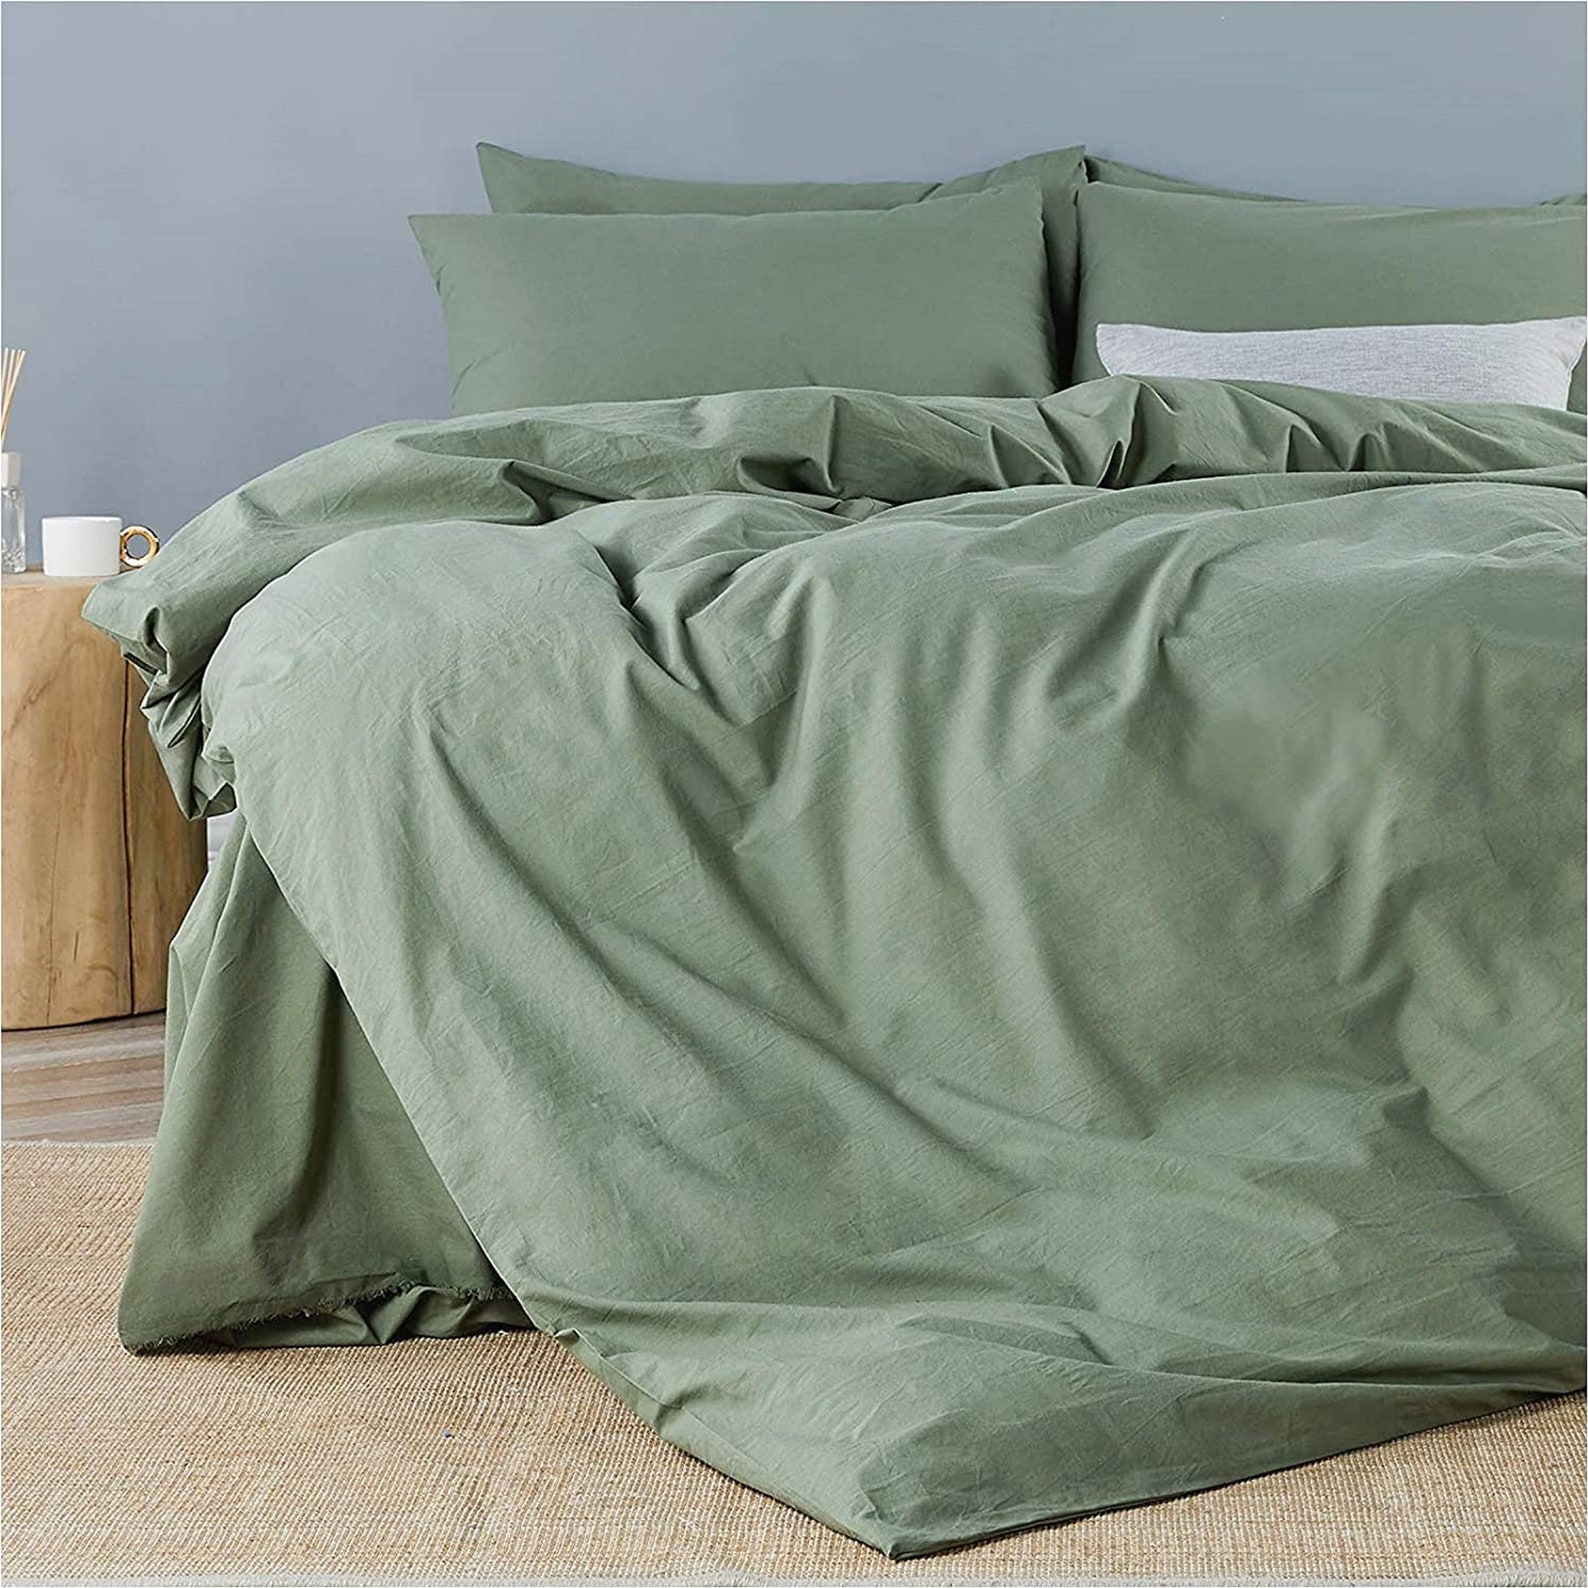 Olive Green 100% Washed Cotton Duvet Cover Set 3 Pieces - Etsy